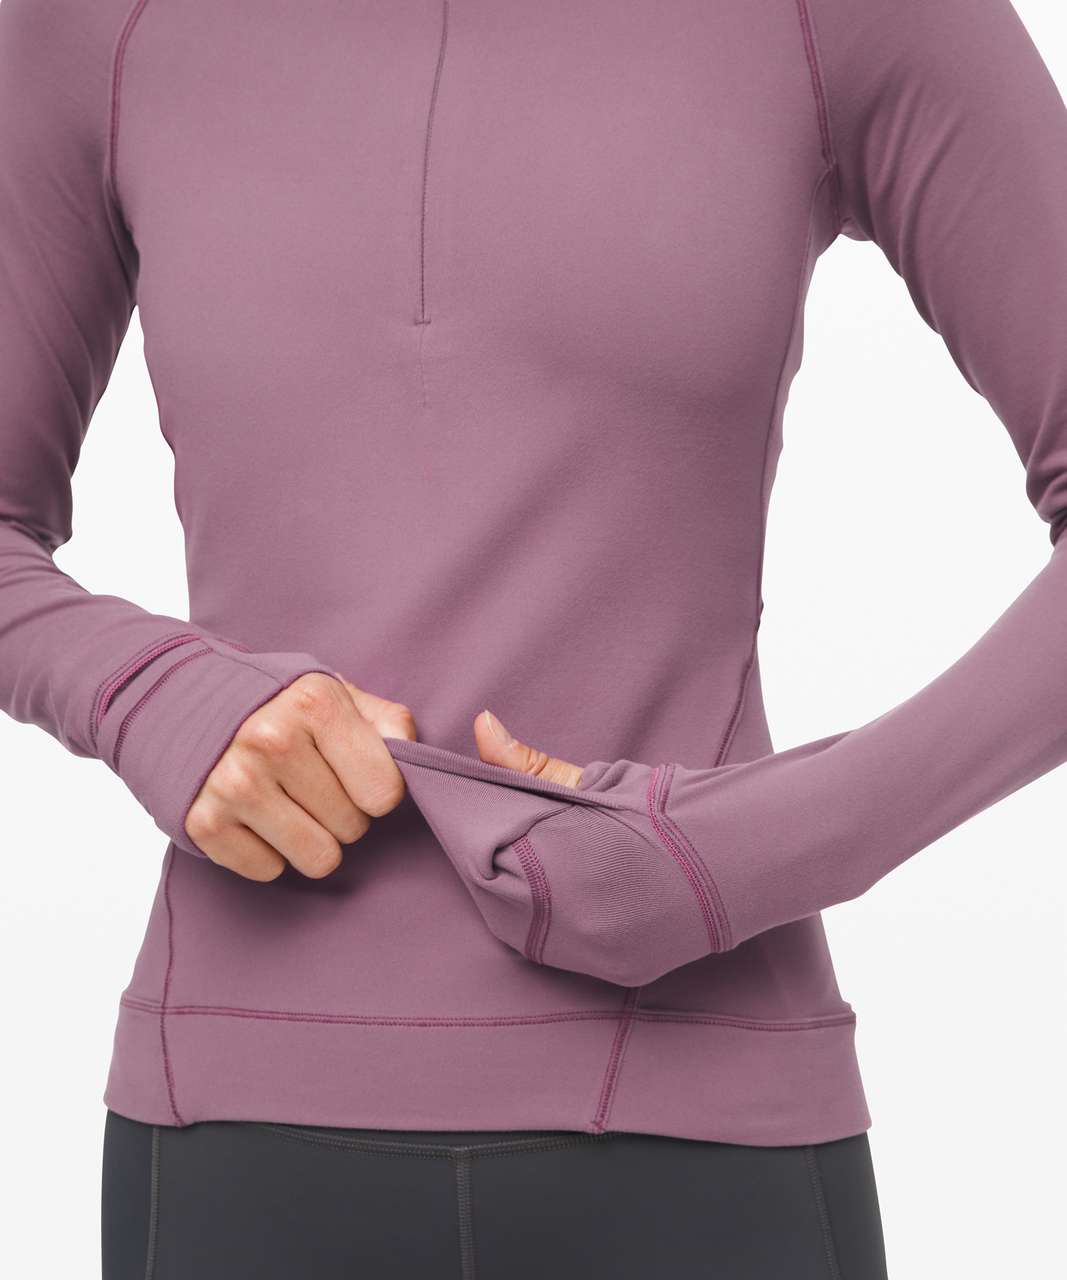 Lululemon Outrun the Elements 1/2 Zip - Frosted Mulberry